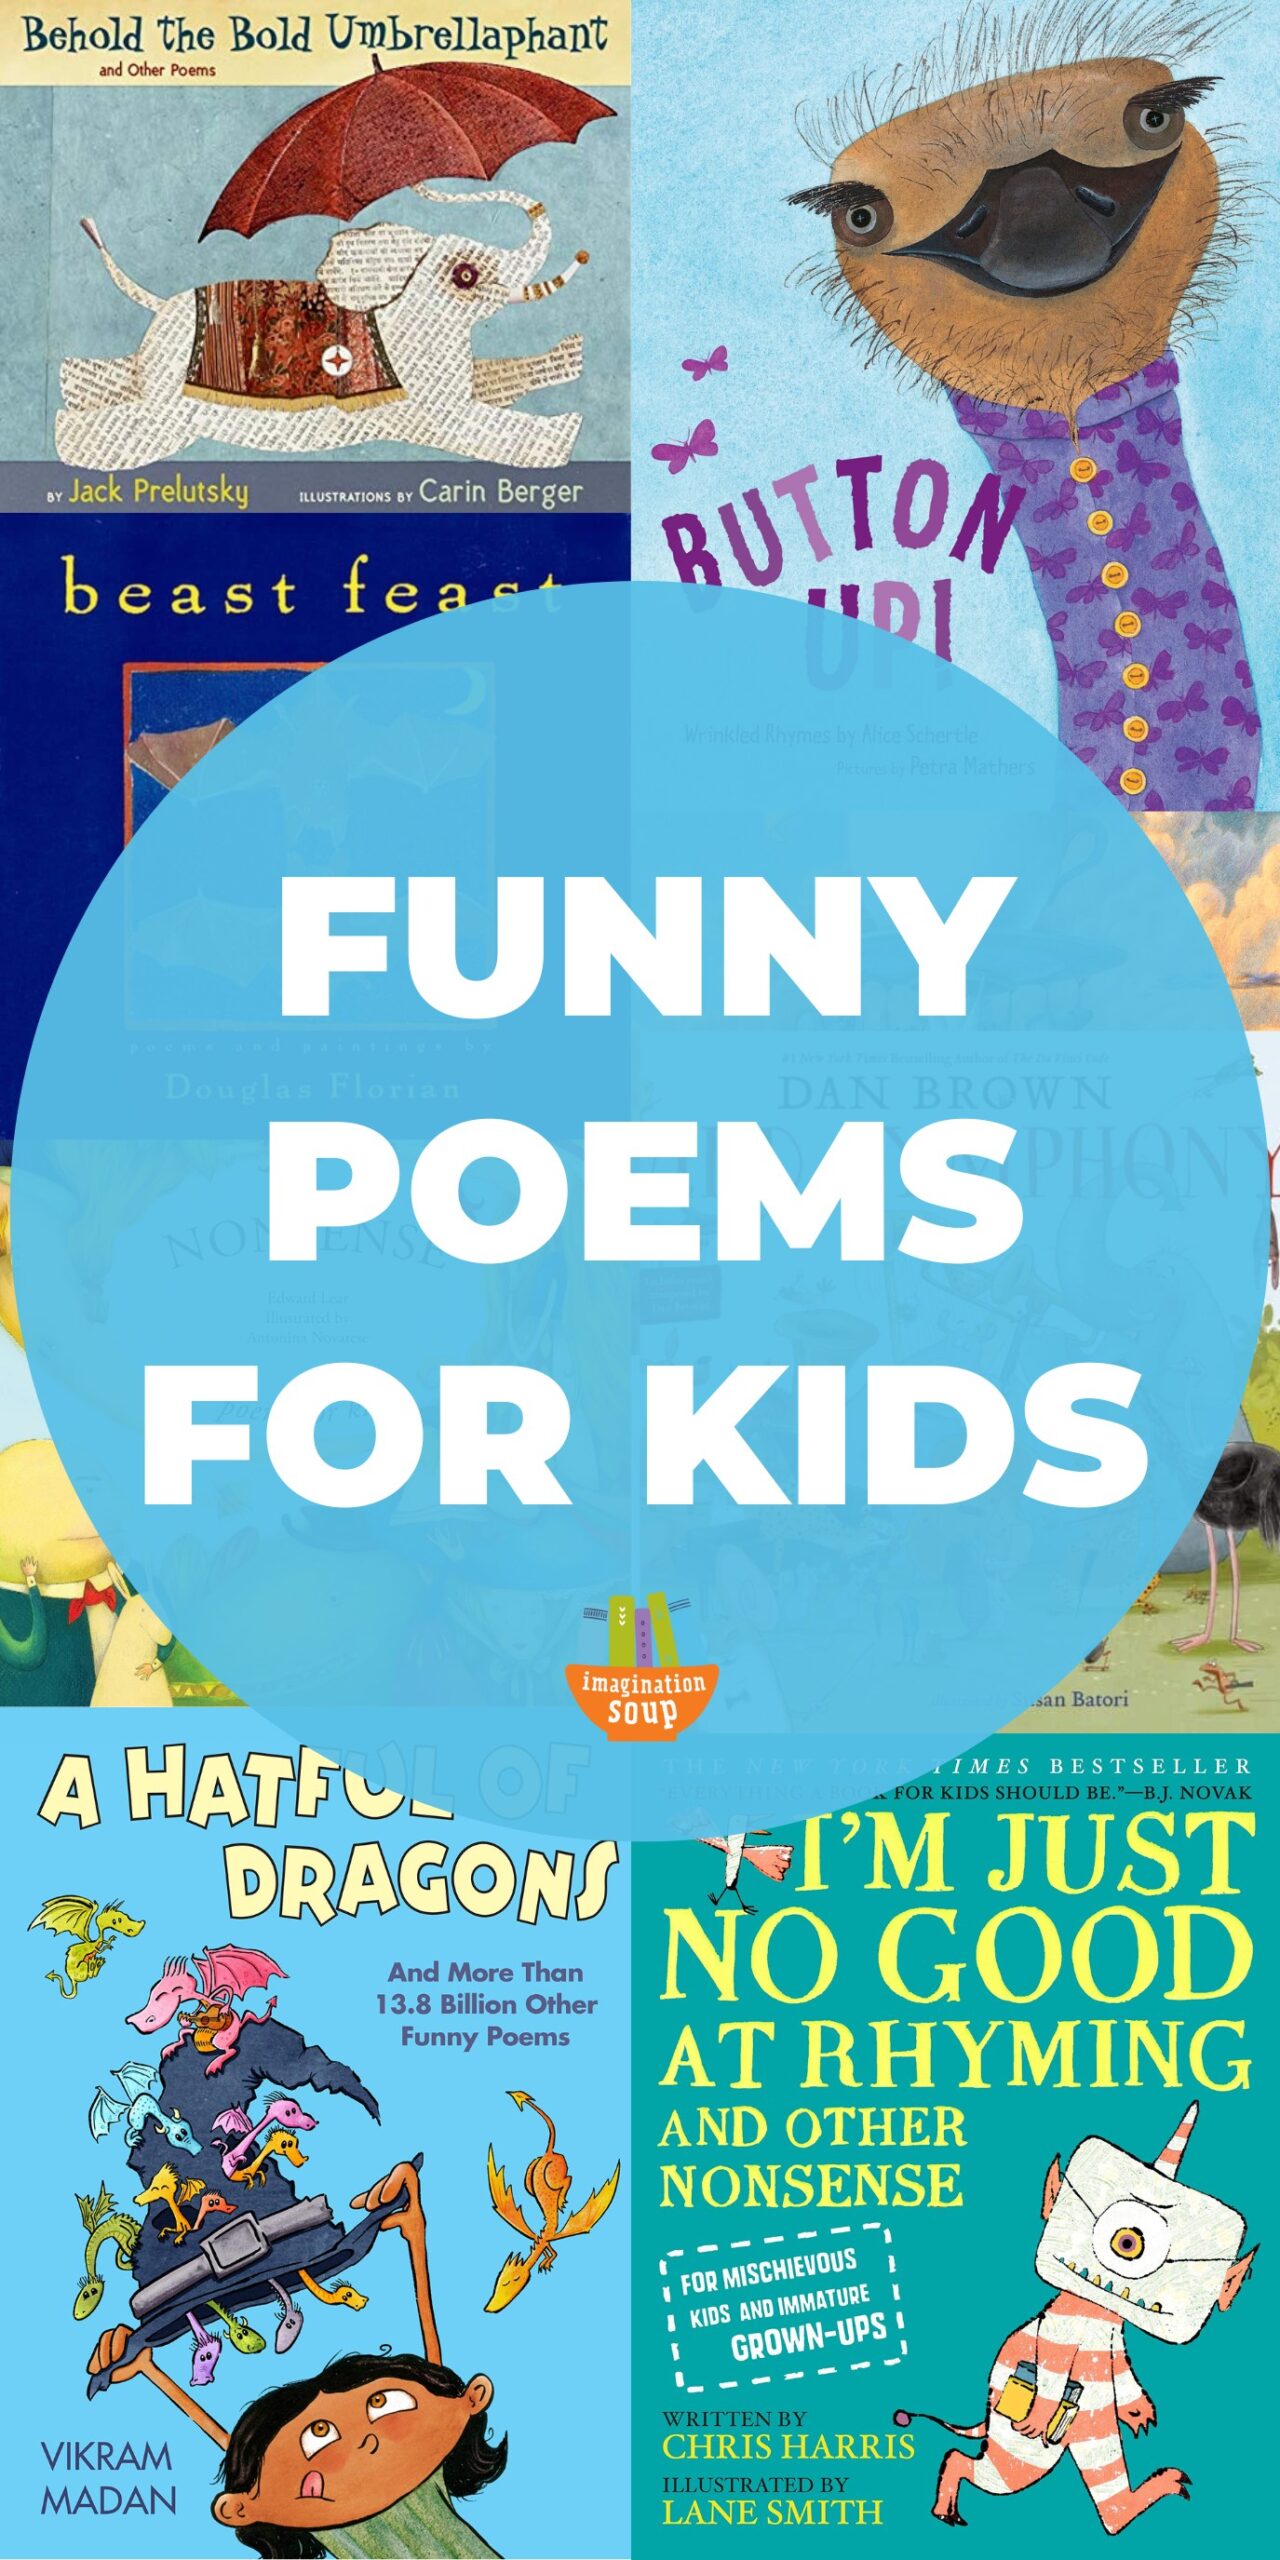 Poetry can be serious, but these funny poems for kids and poetry picture books are seriously silly!

Some are laugh-out-loud nonsense, while others are filled with clever giggles, but they will all get your kids engaged in poetry even if they have never been a fan of it before.